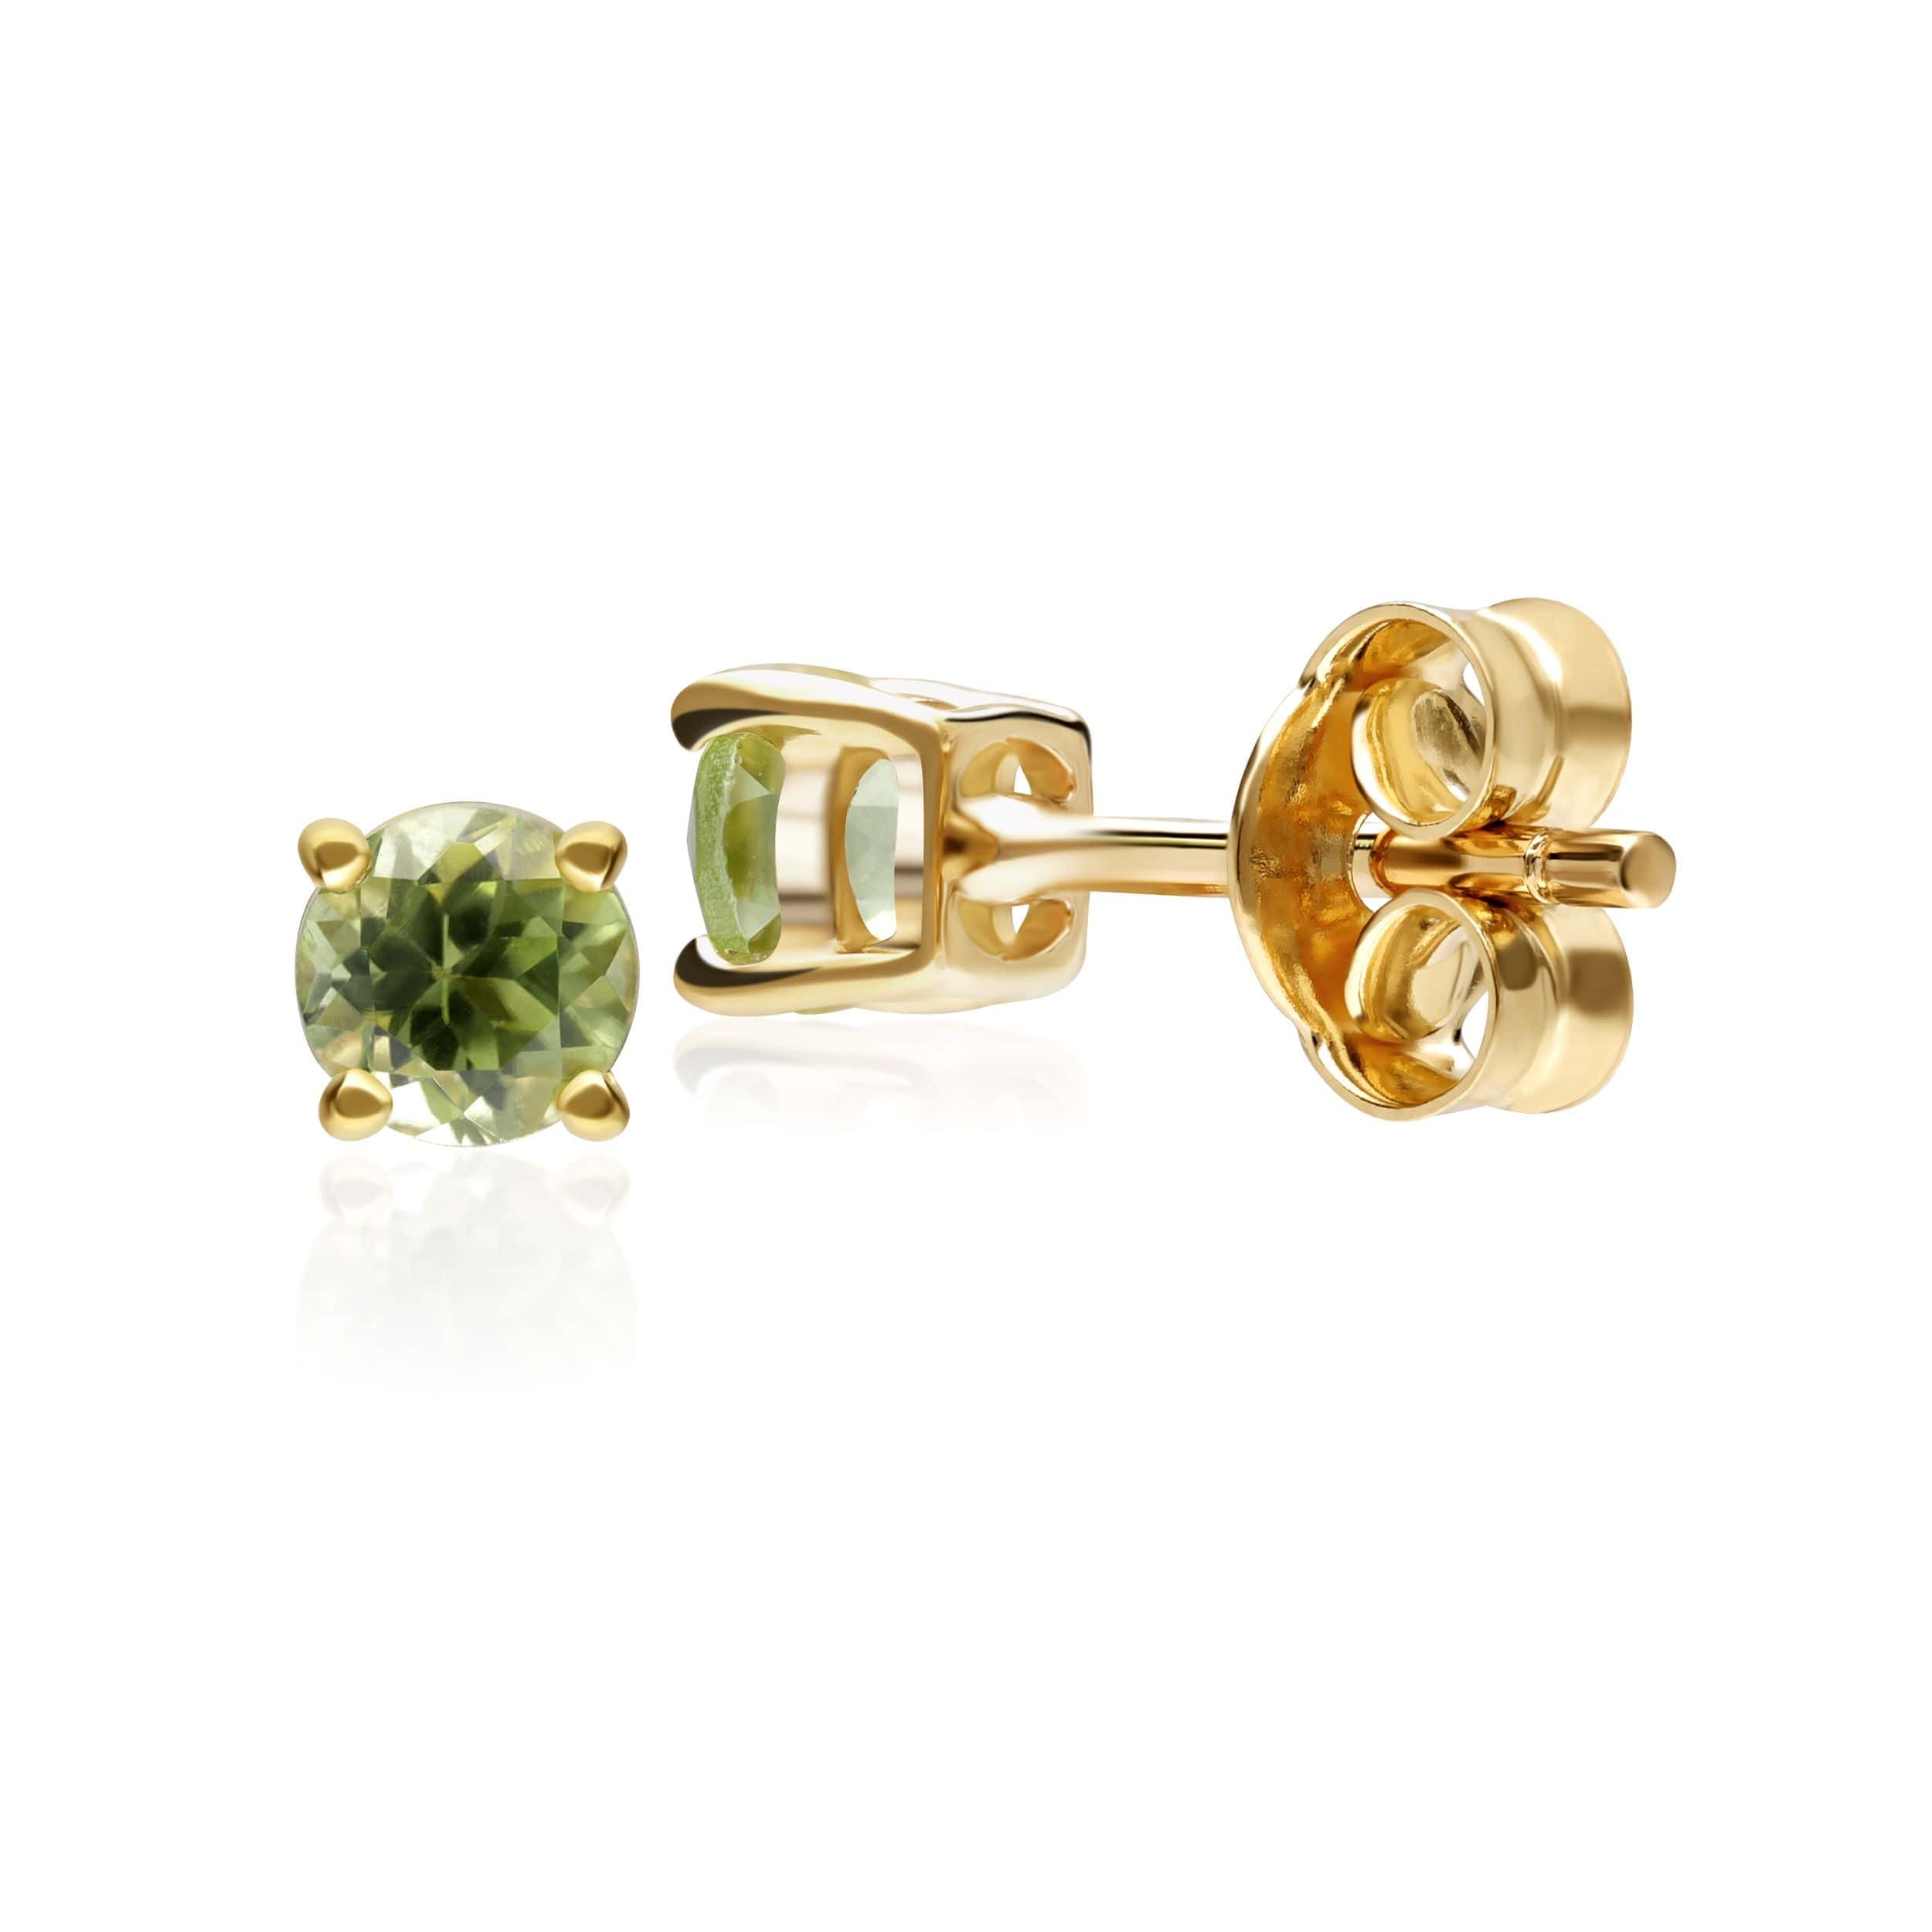 11562 Classic Round Peridot Stud Earrings in 9ct Yellow Gold 2